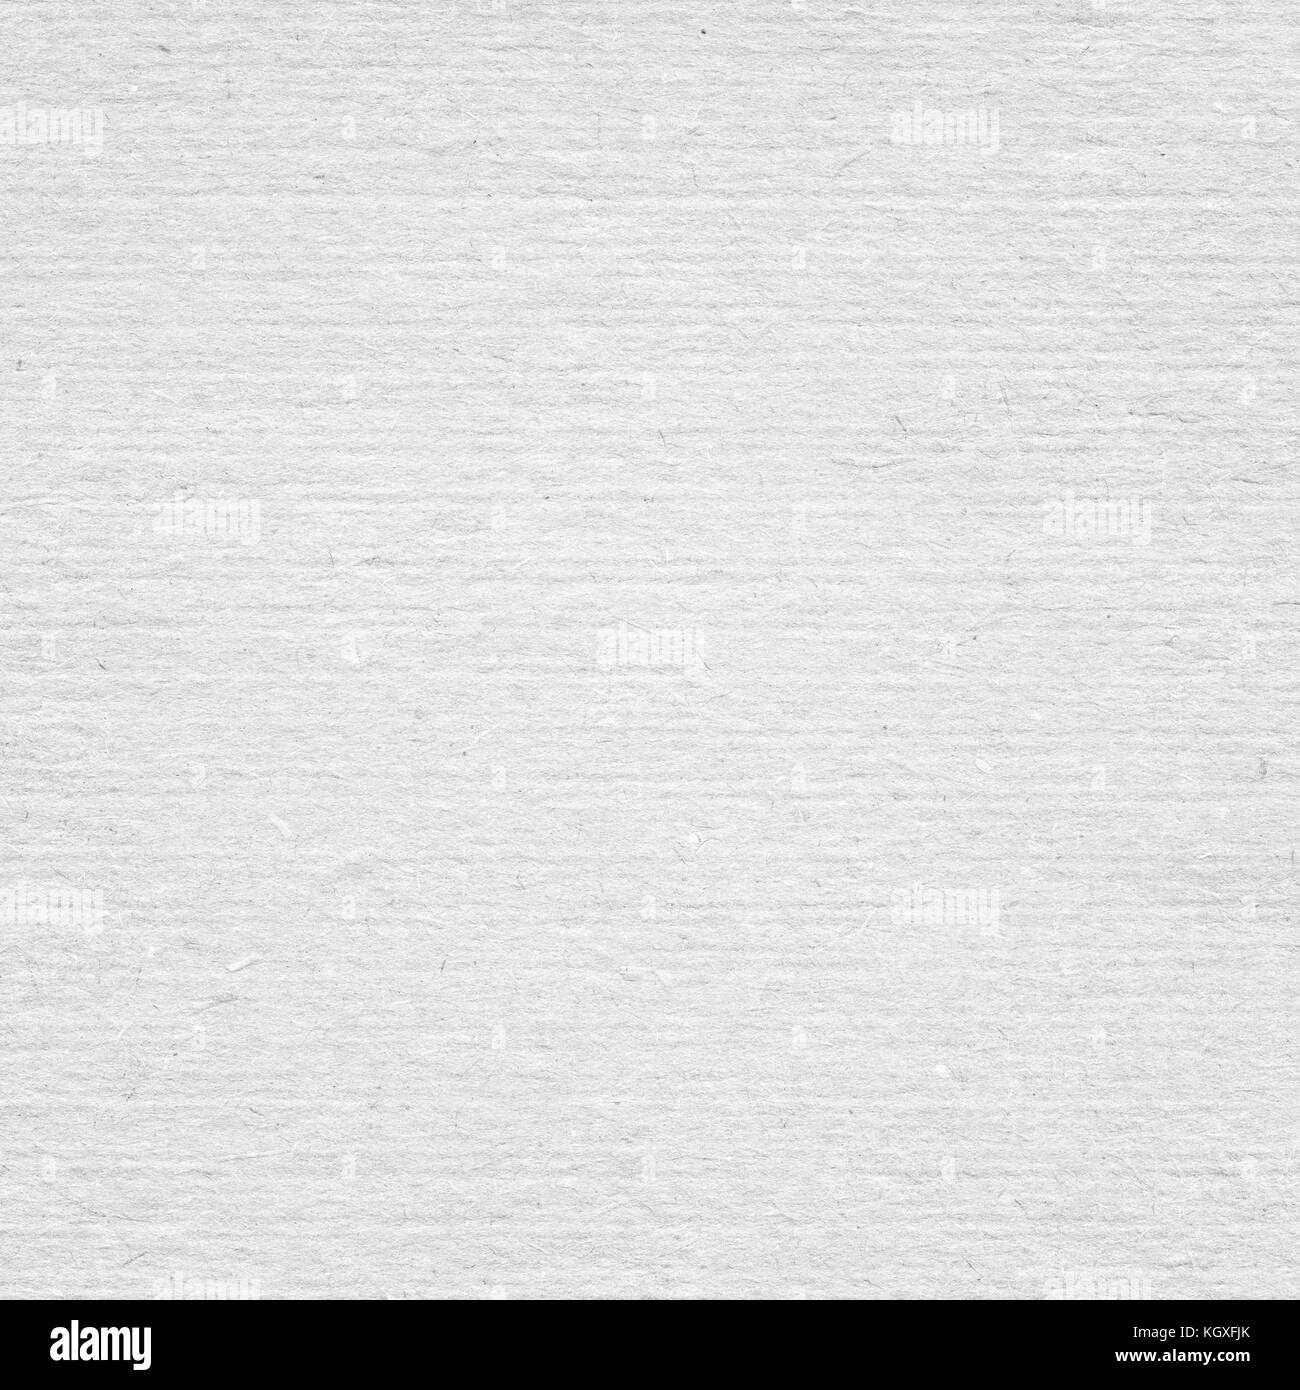 White recycled vertical note paper texture, light background. Stock Photo